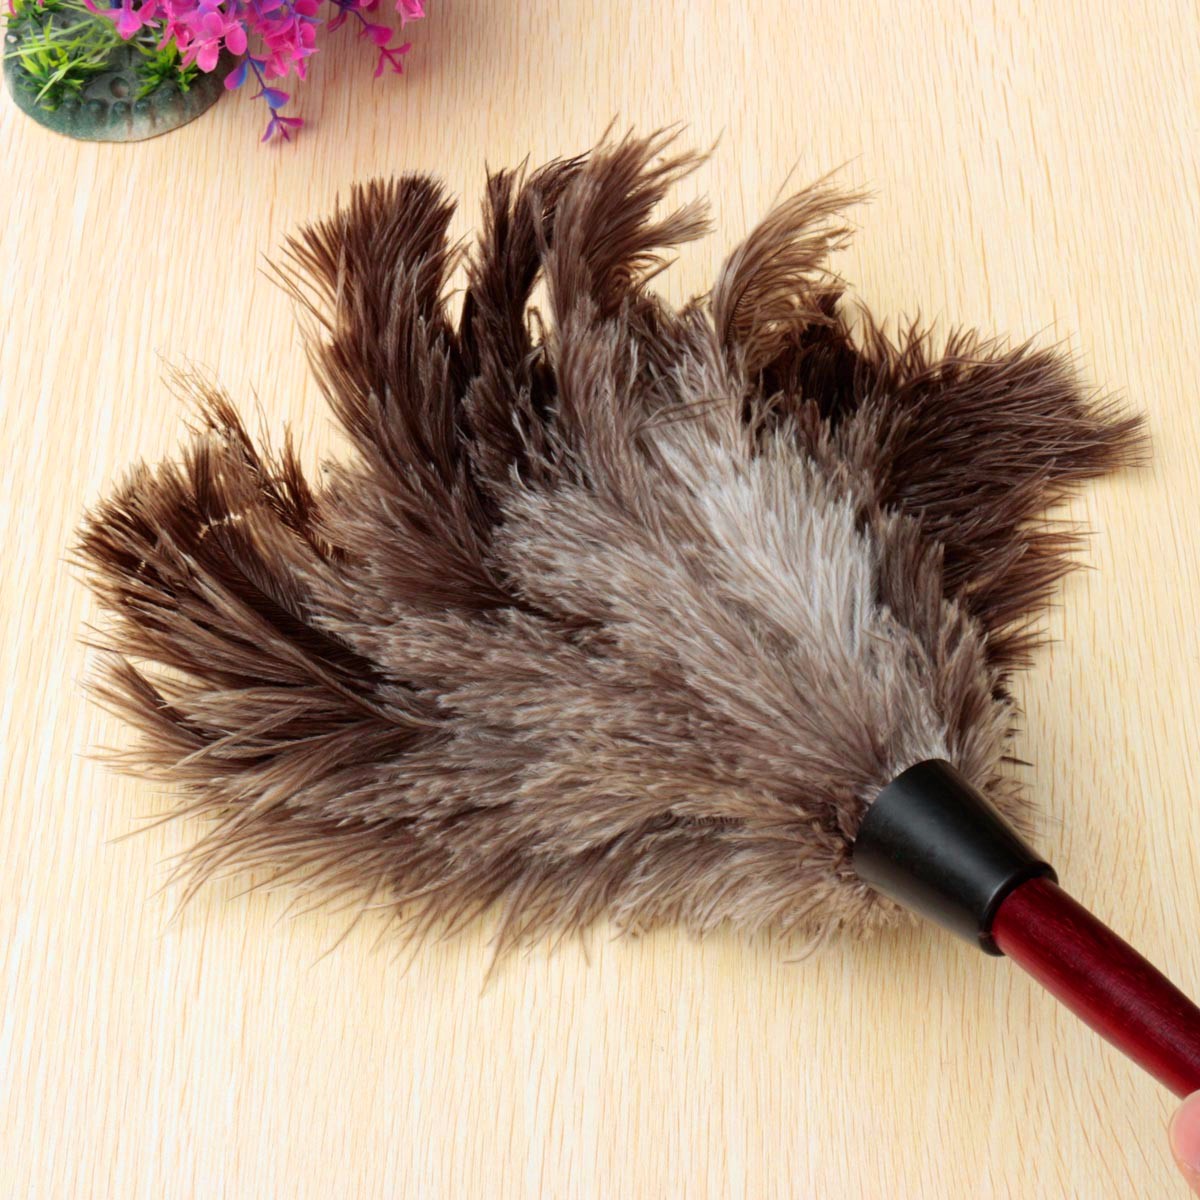 Jcevium Anti-Static Ostrich Feather Fur Brush Duster Dust Cleaning Tool Wooden Handle